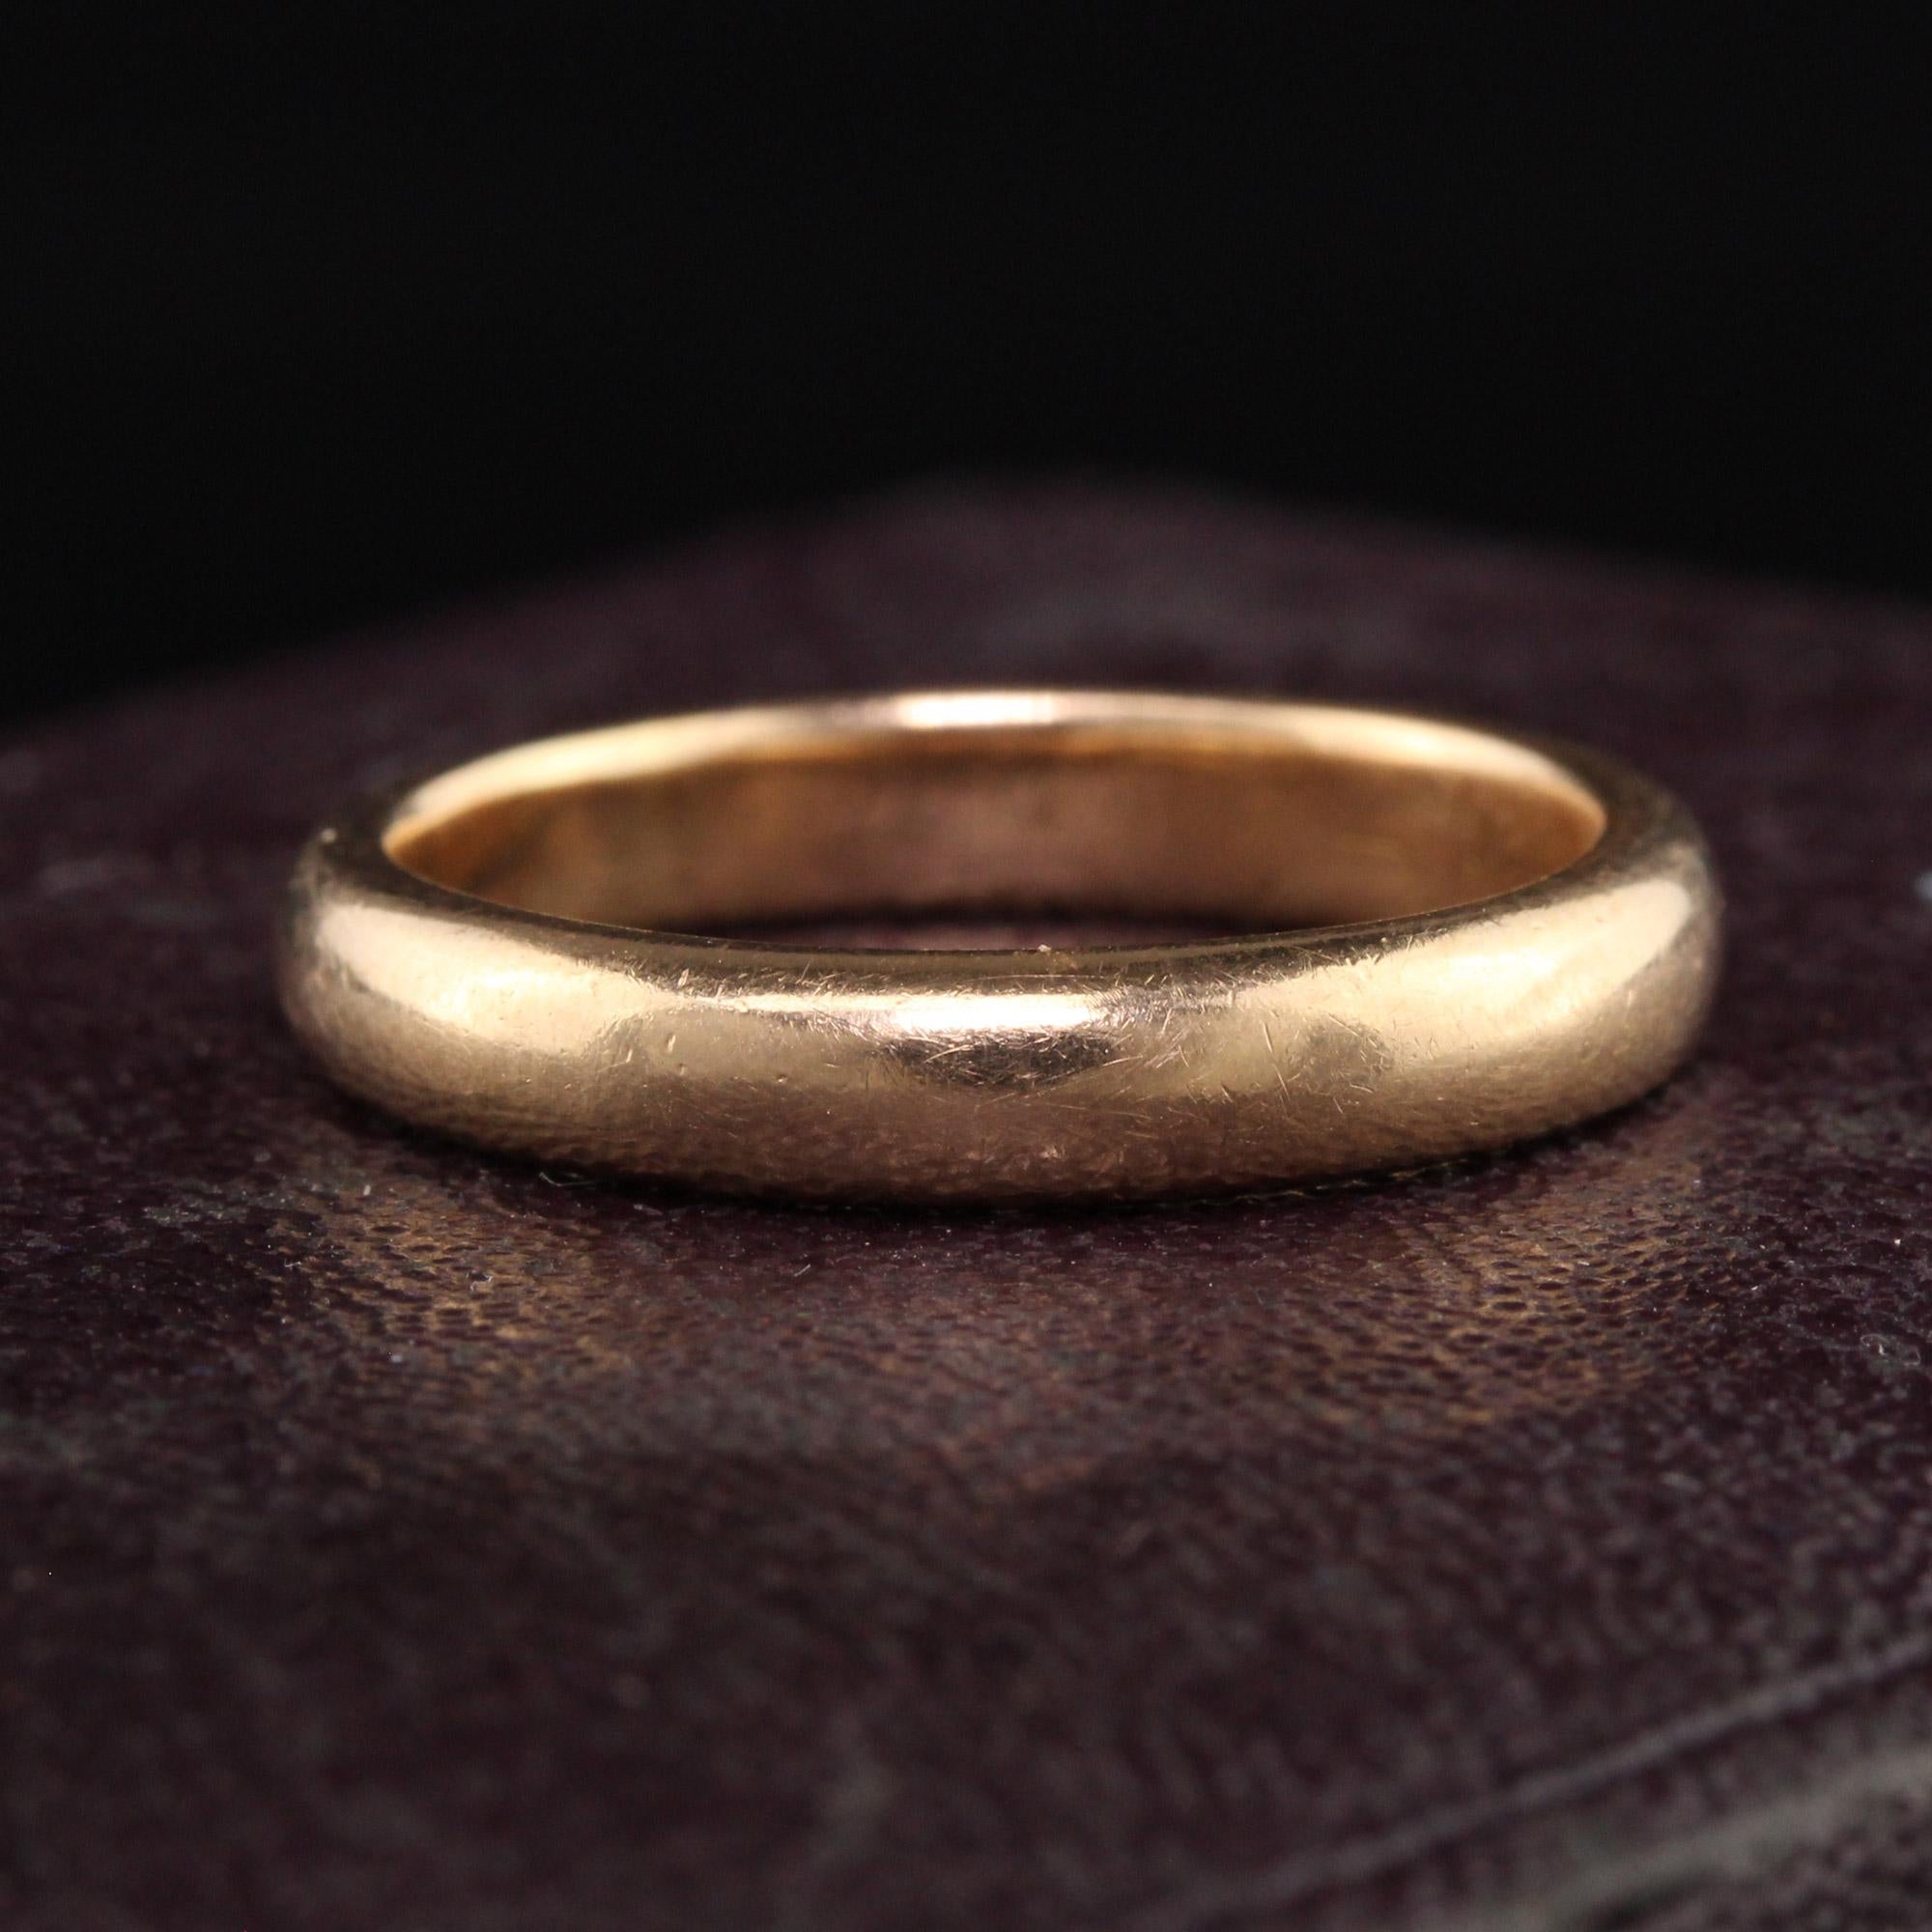 Beautiful Antique Victorian14K Yellow Gold Classic Wedding Band - Size 6 1/2. This classic band is in great condition and has an aged patina that only time can give.

Item #R1089

Metal: 14K Yellow Gold

Weight: 4.4 Grams

Size: 6 1/2

Measurements: